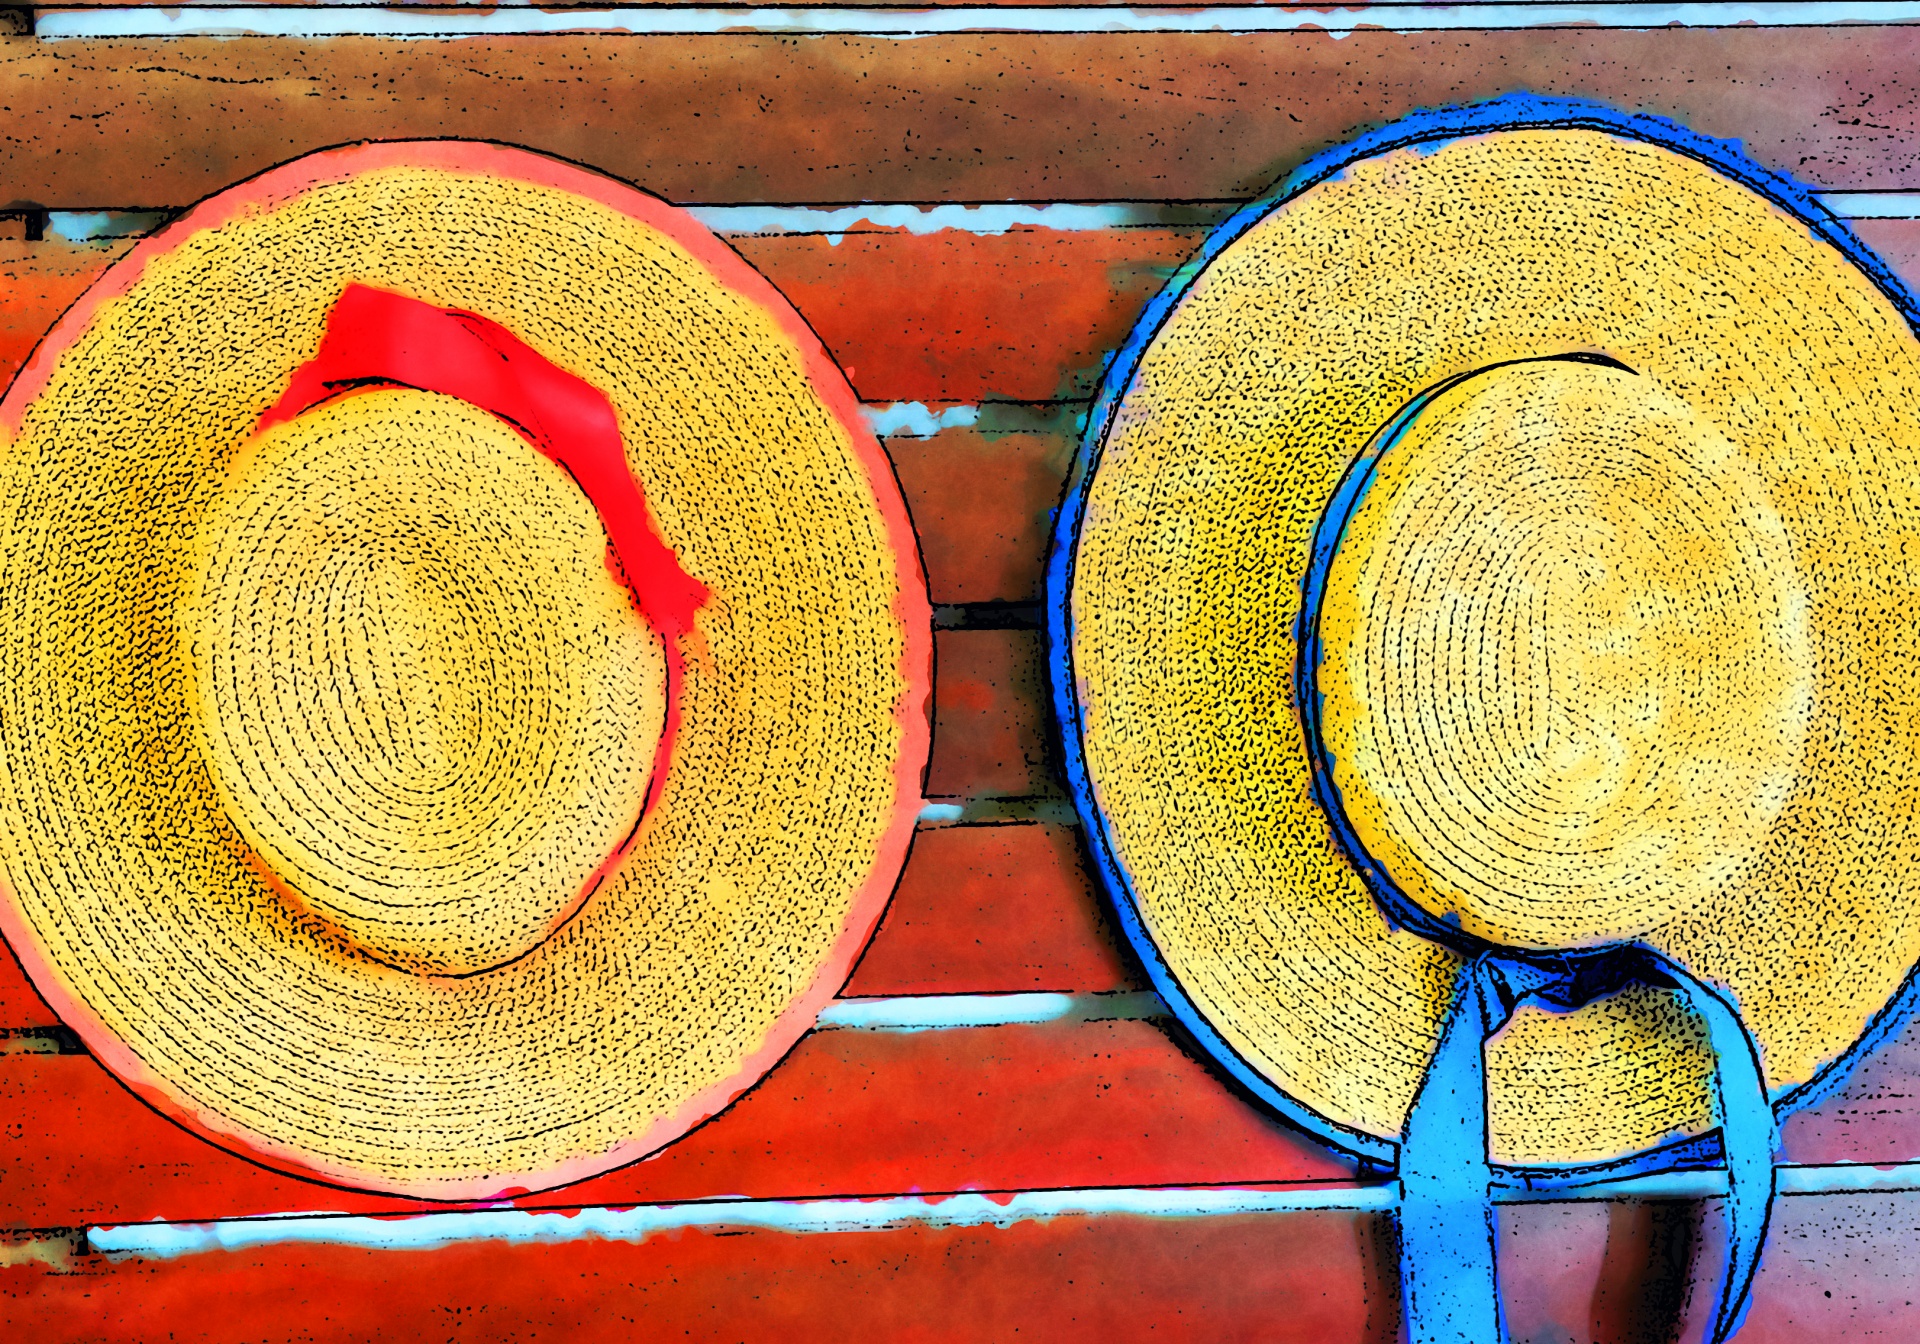 Summer Hats: Two straw hats hanging on a wood slat wall